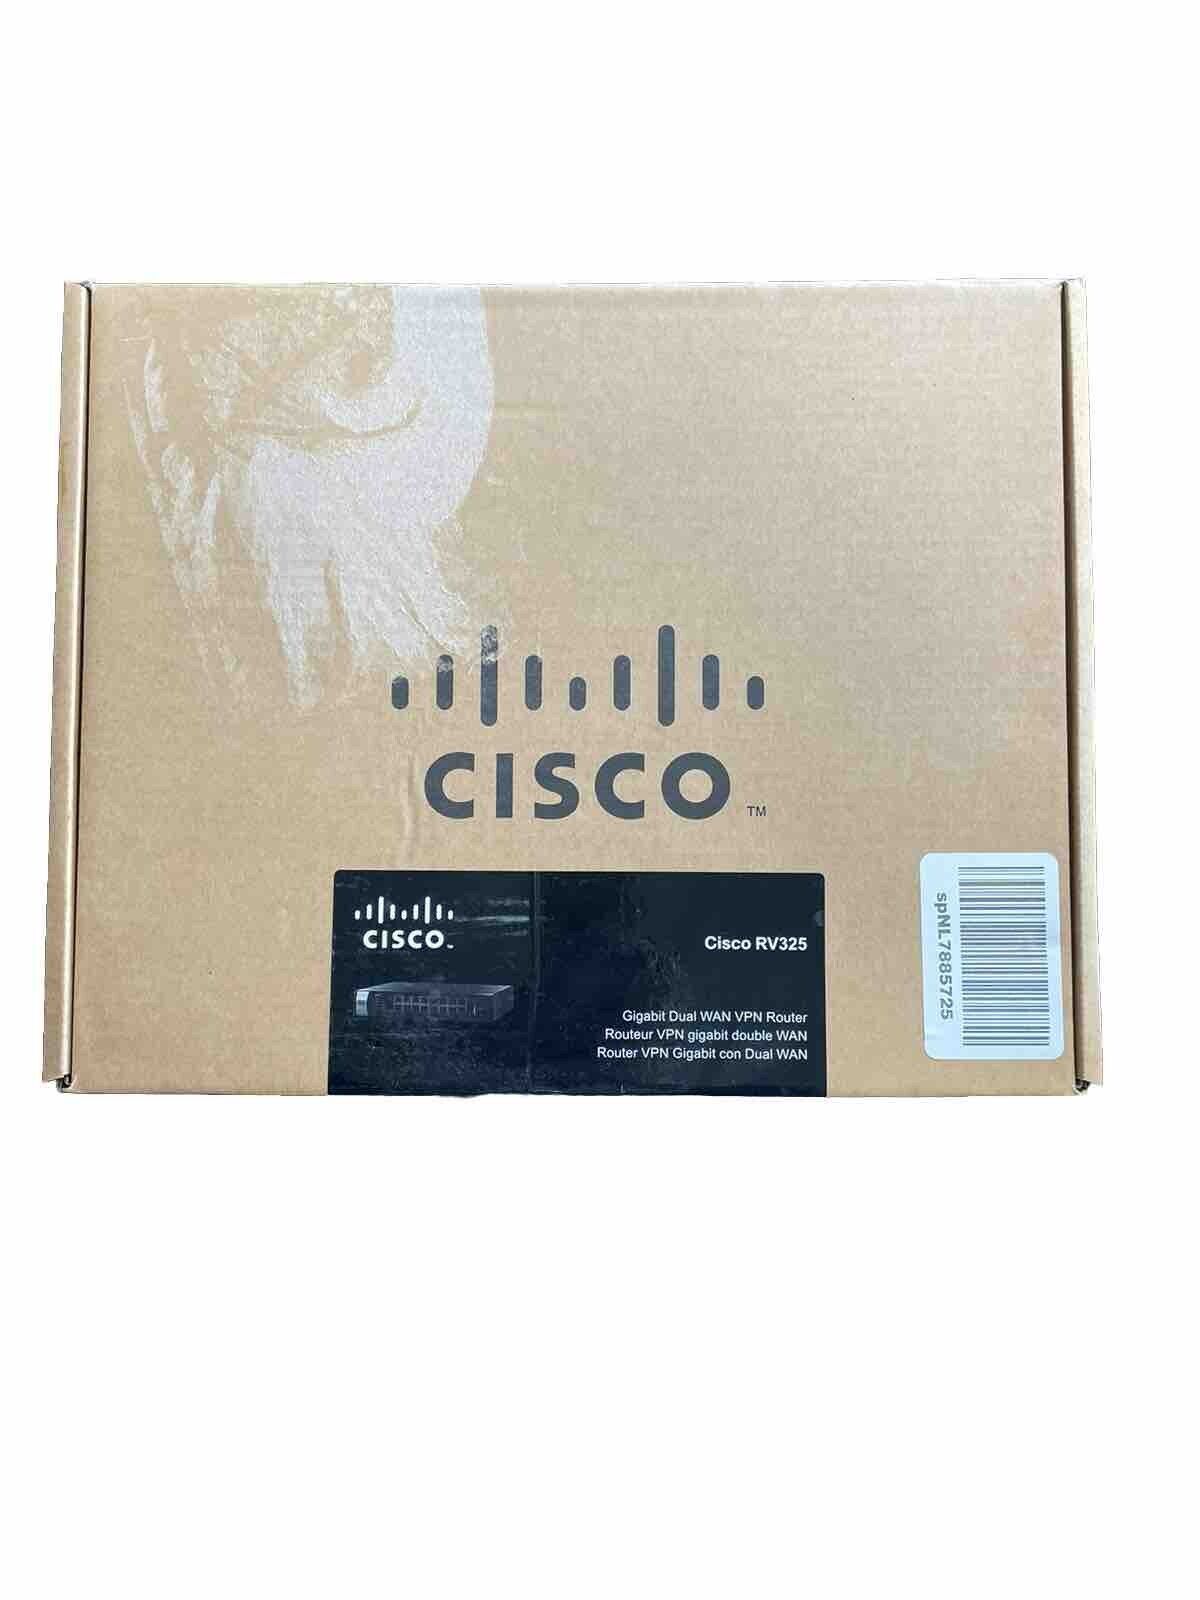 NEW Cisco RV325 16-Port Gigabit Router Dual WAN w/ CHARGER and MOUNT #RV325K9NA